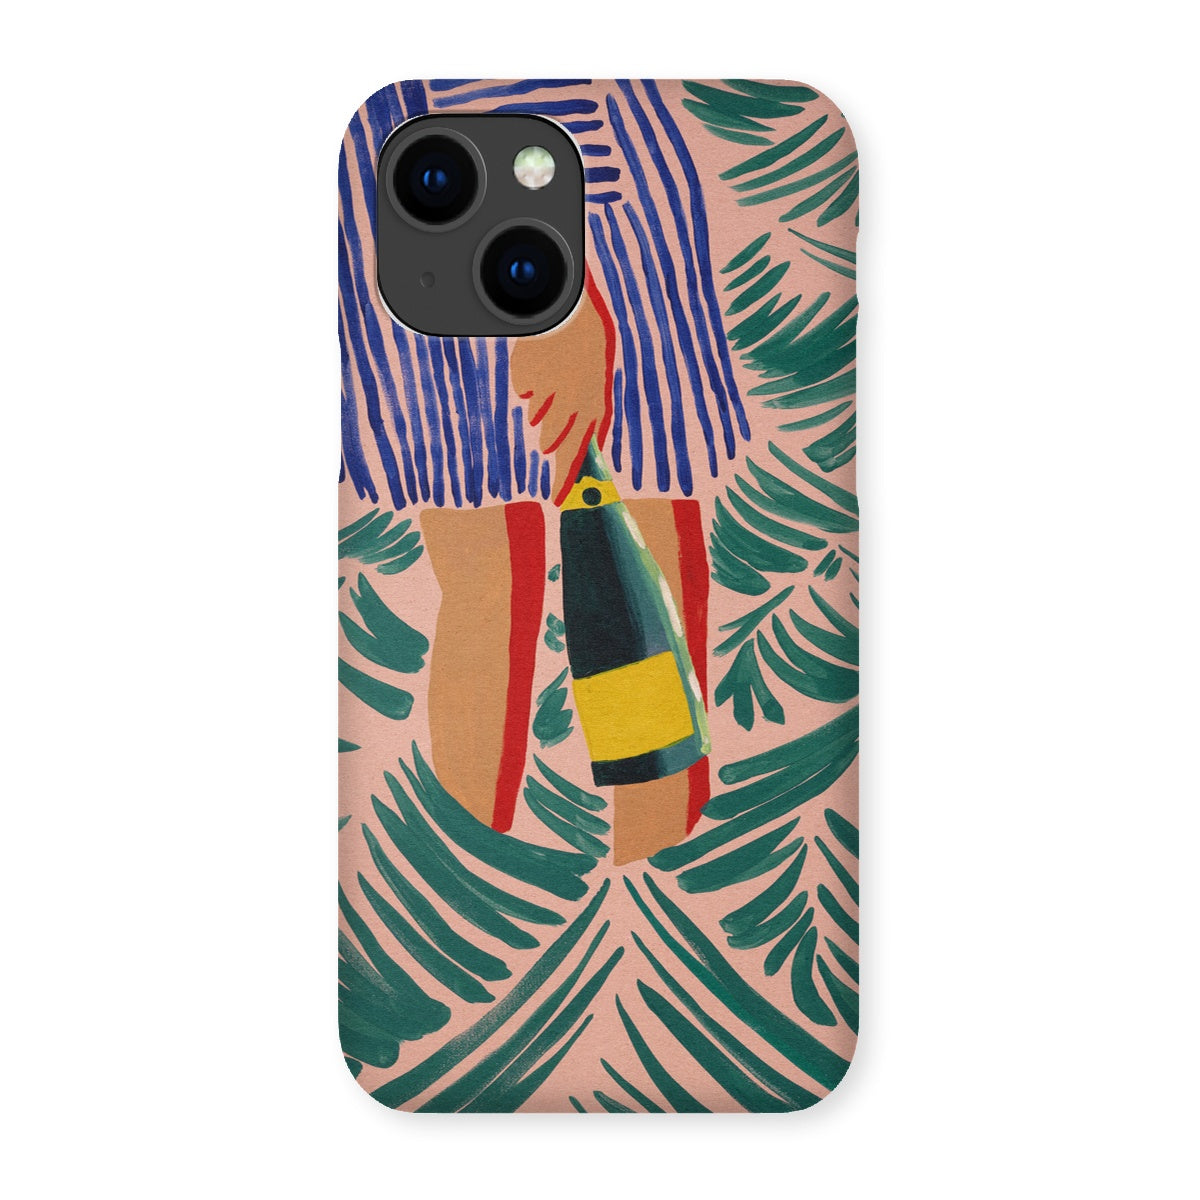 Bring out the champagne Snap Phone Case